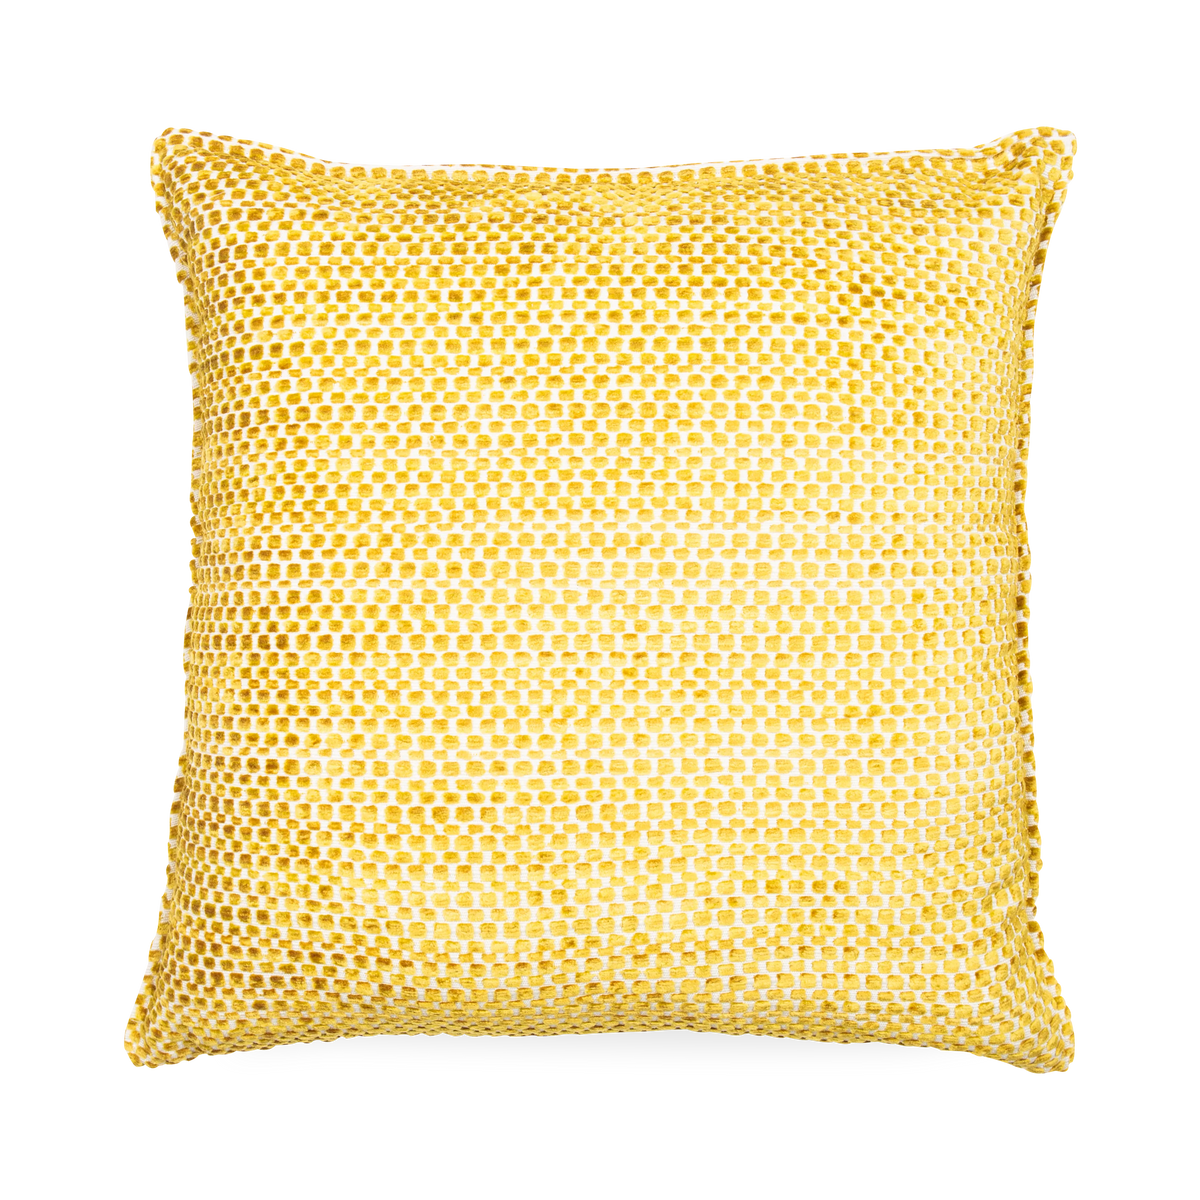 A textural joy, the Velvet Squares Pillow is defined by its luxurious velvet squares that are created through a unique weaving style.